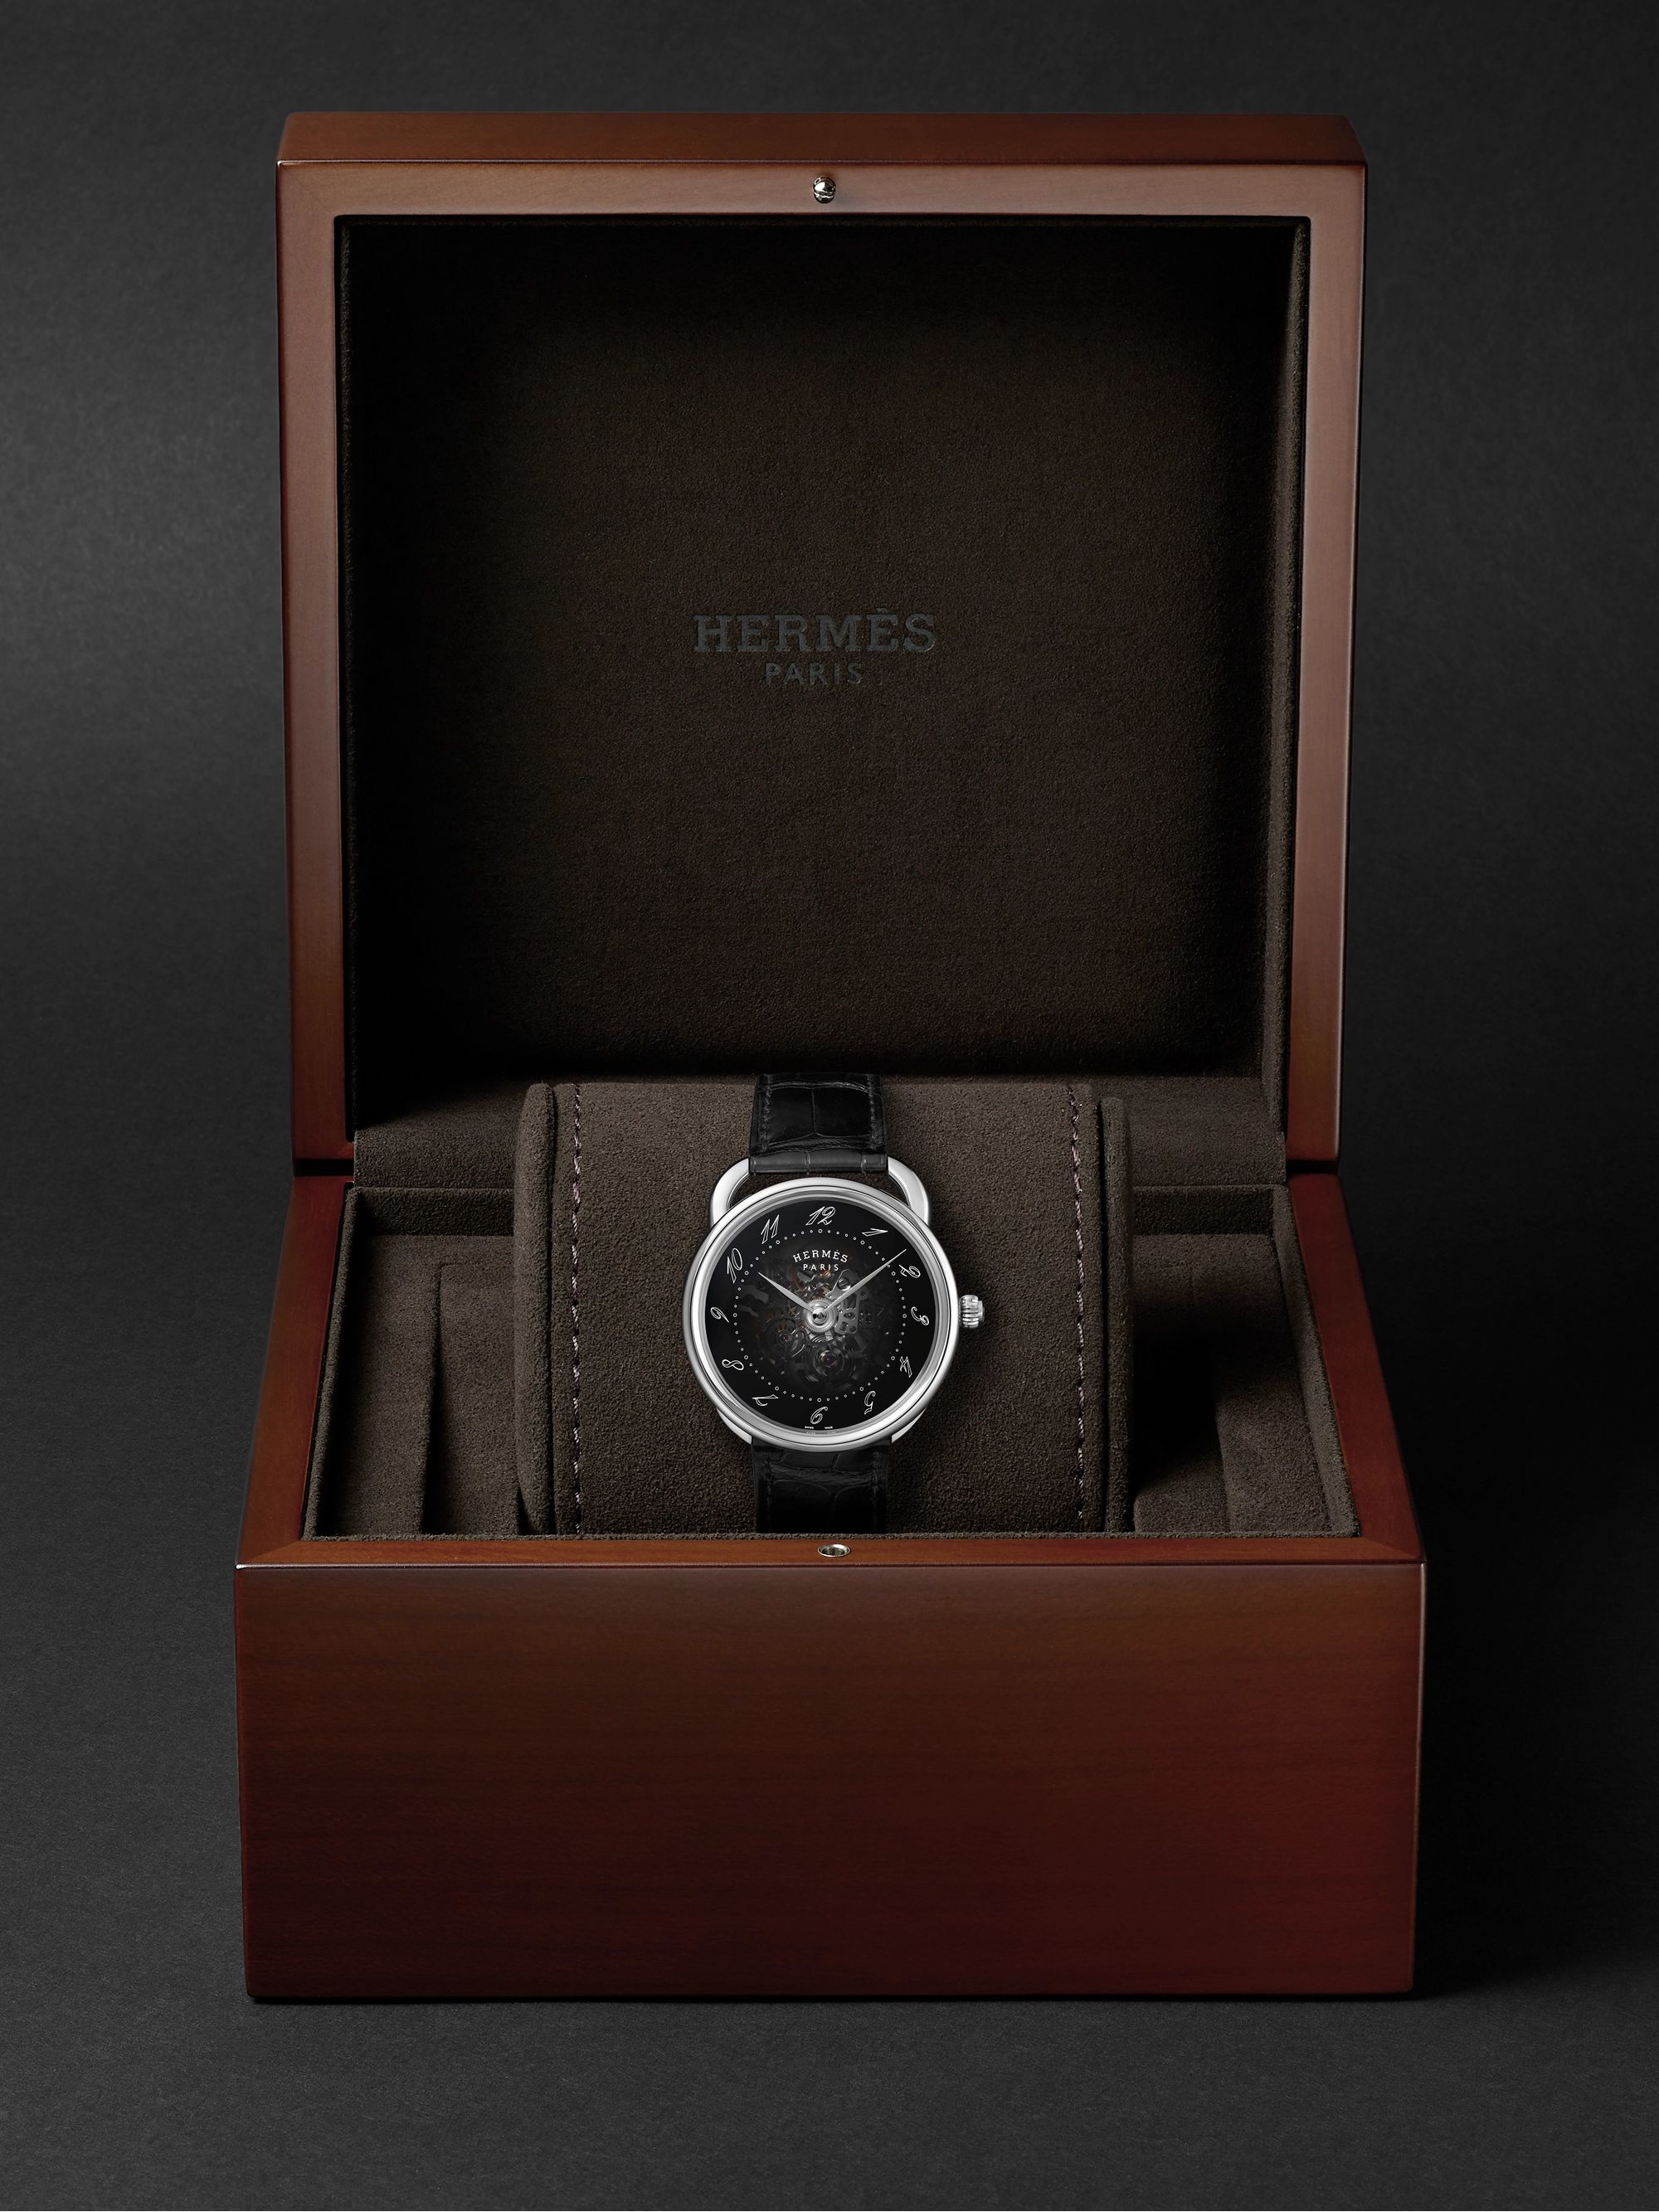 HERMÈS TIMEPIECES Arceau Squelette Automatic 40mm Stainless Steel and Alligator Watch, Ref. No. W055537WW00